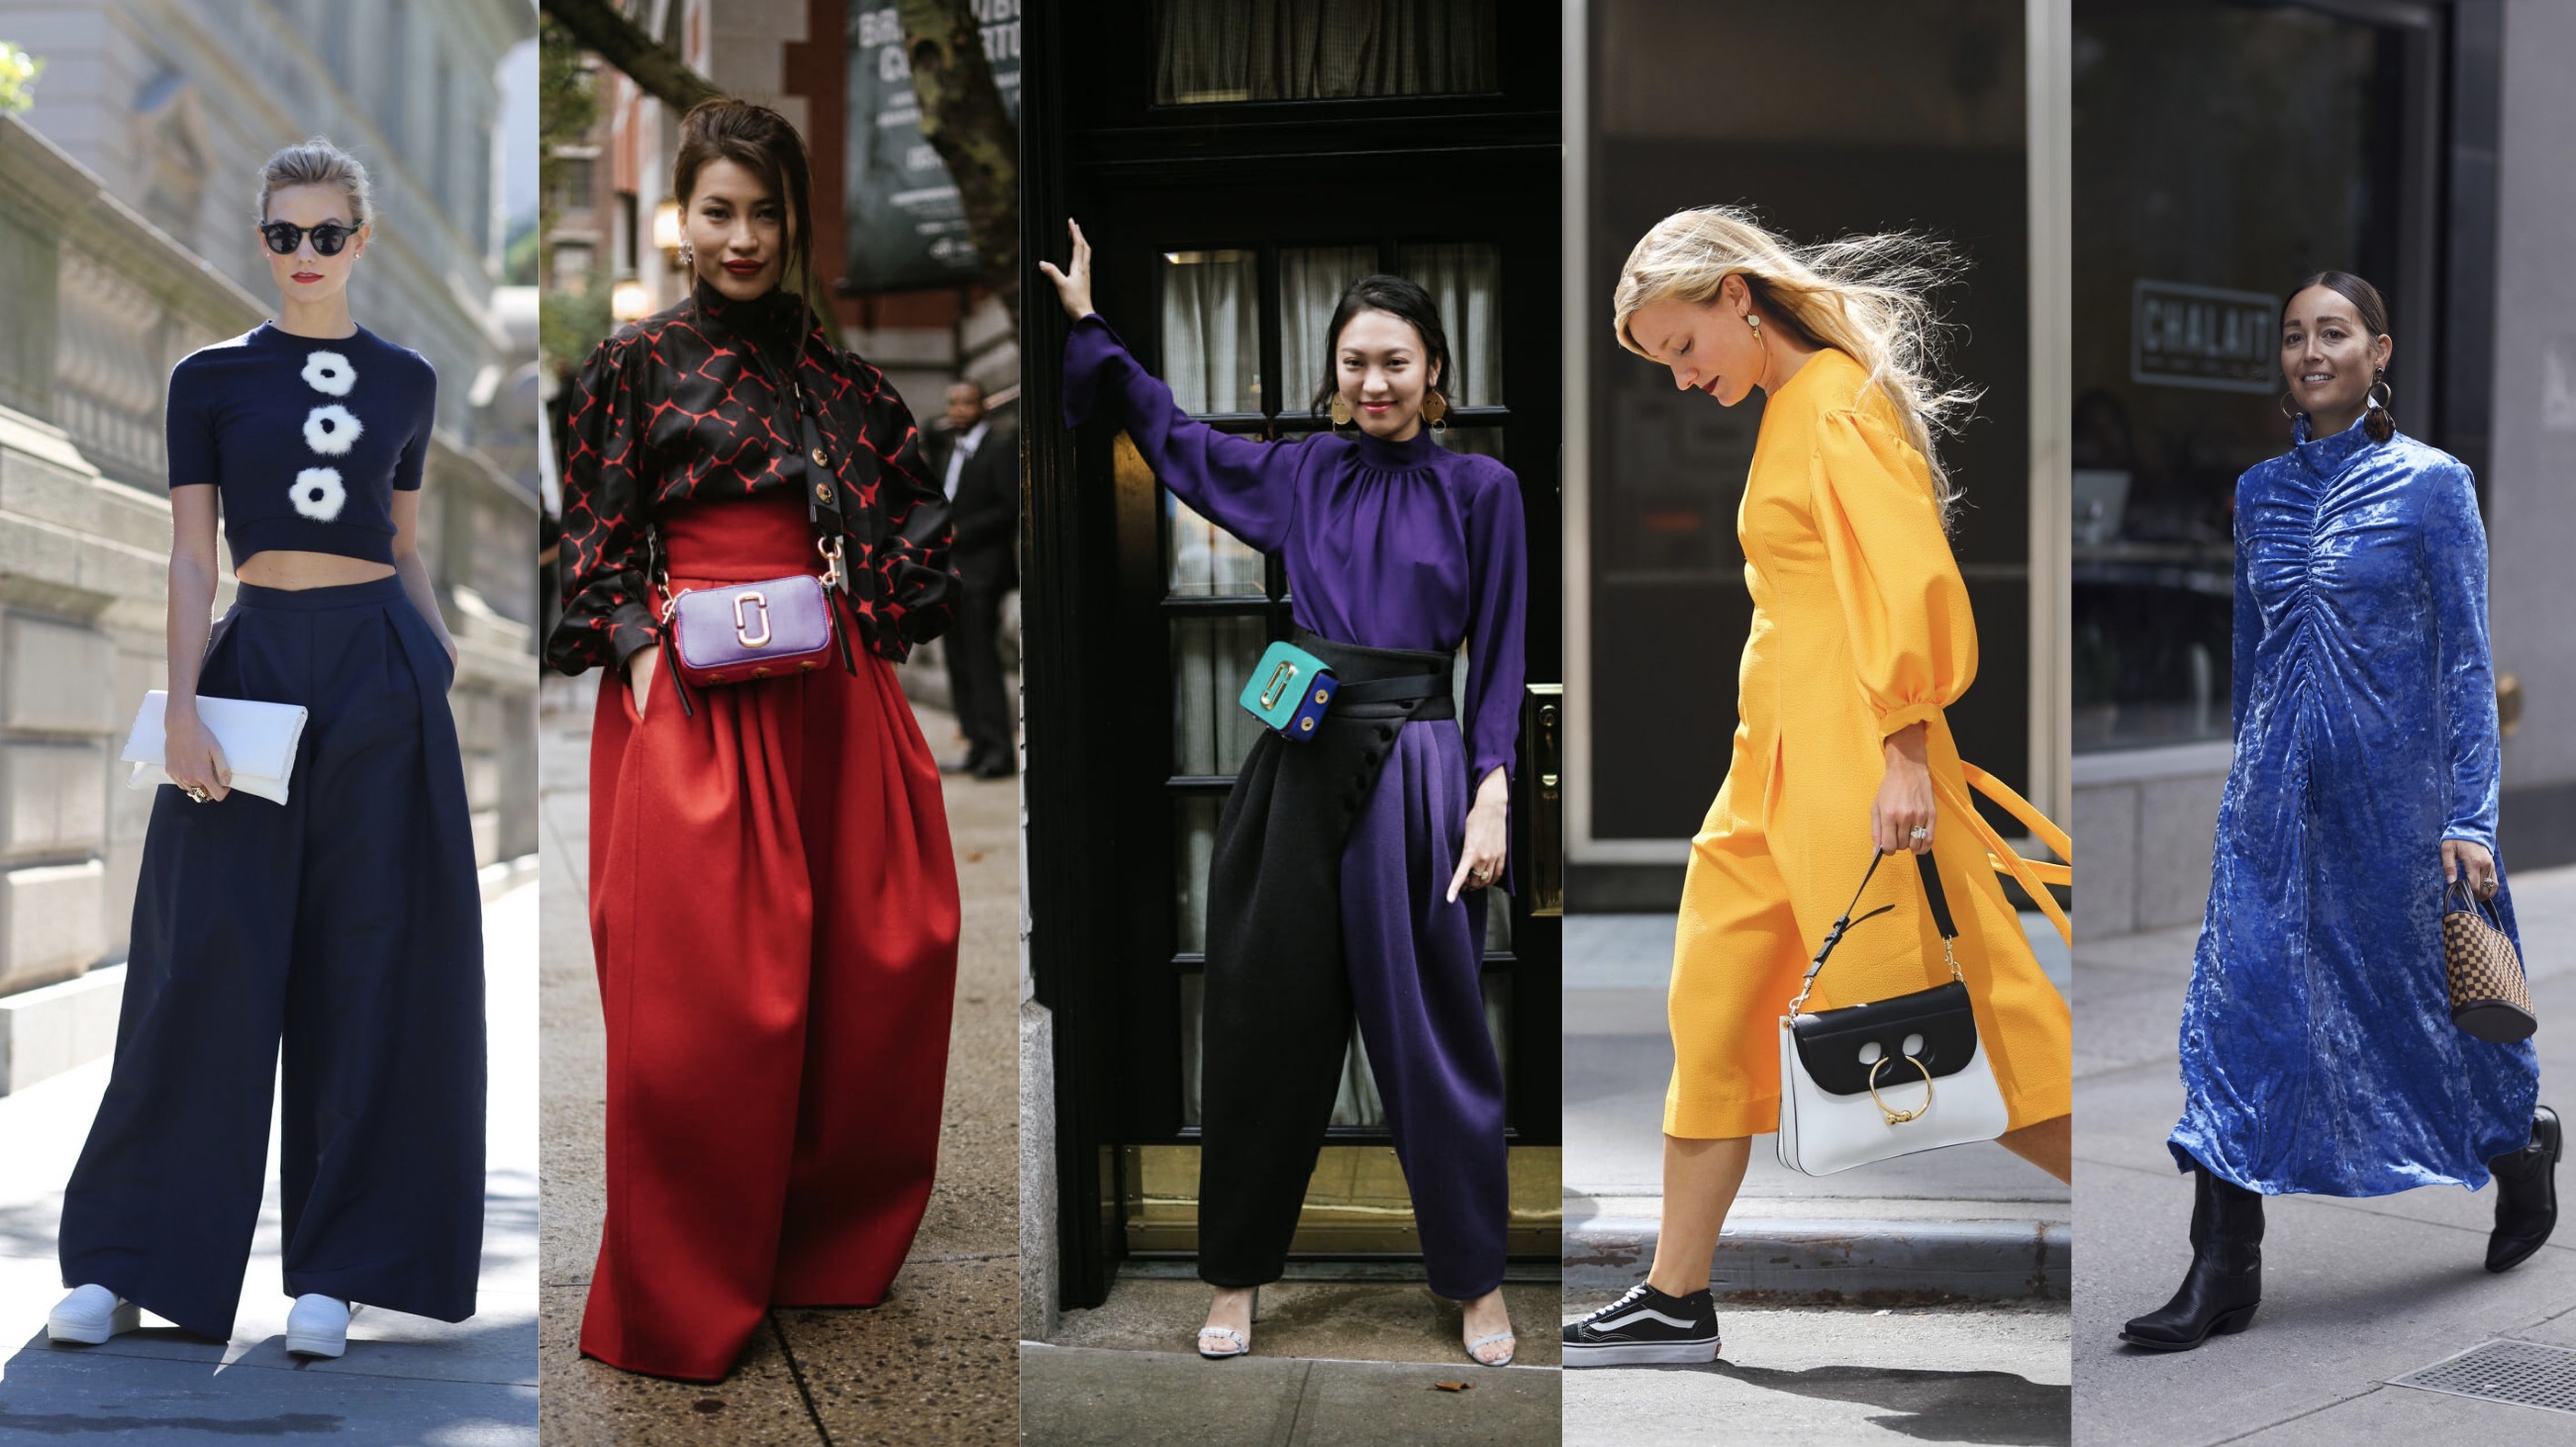 The Grey Edit-NYFW Street Style Looks by Trend-Oversized Primary Colors